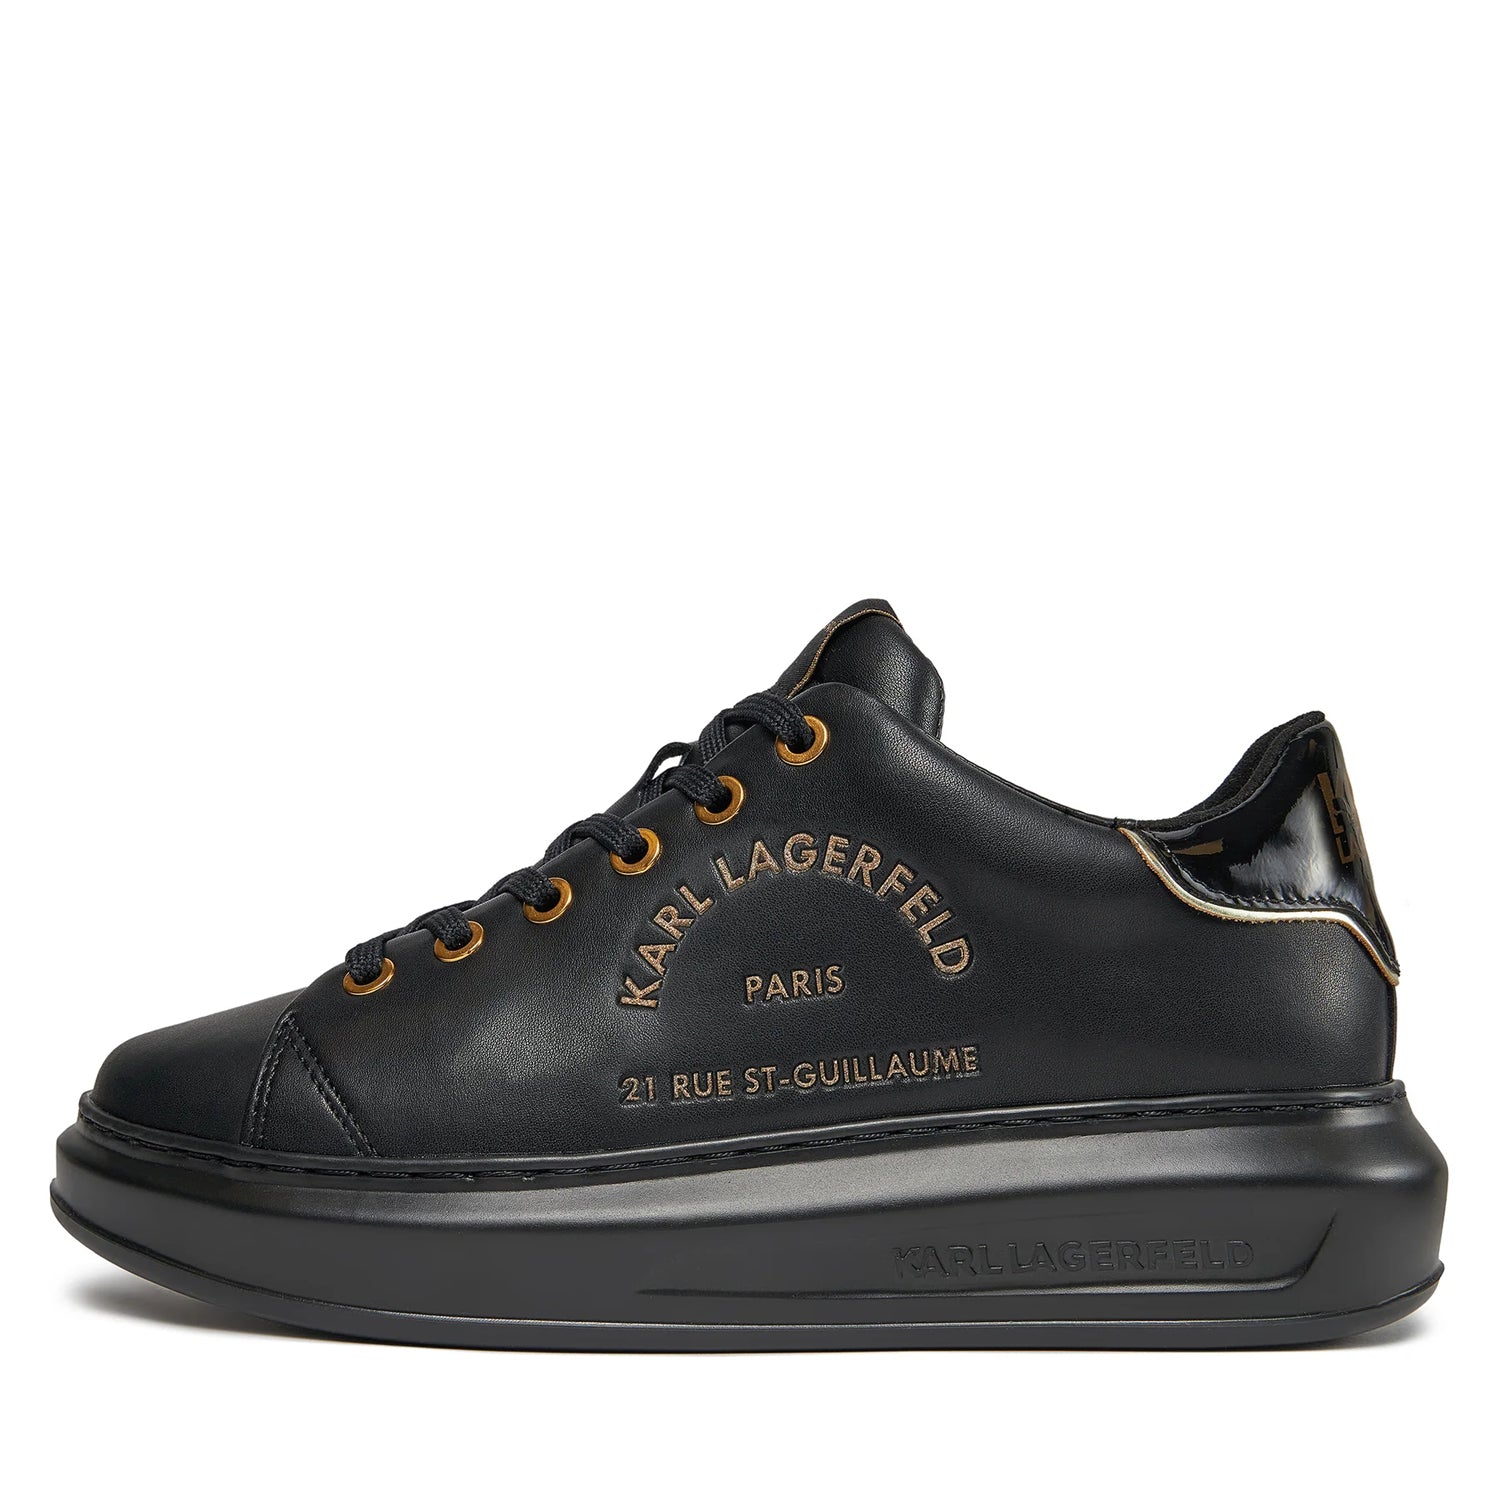 Karl Lagerfeld Sapatilhas Sneakers Shoes Kl62539f Blk Gold Preto Ouro_shot5